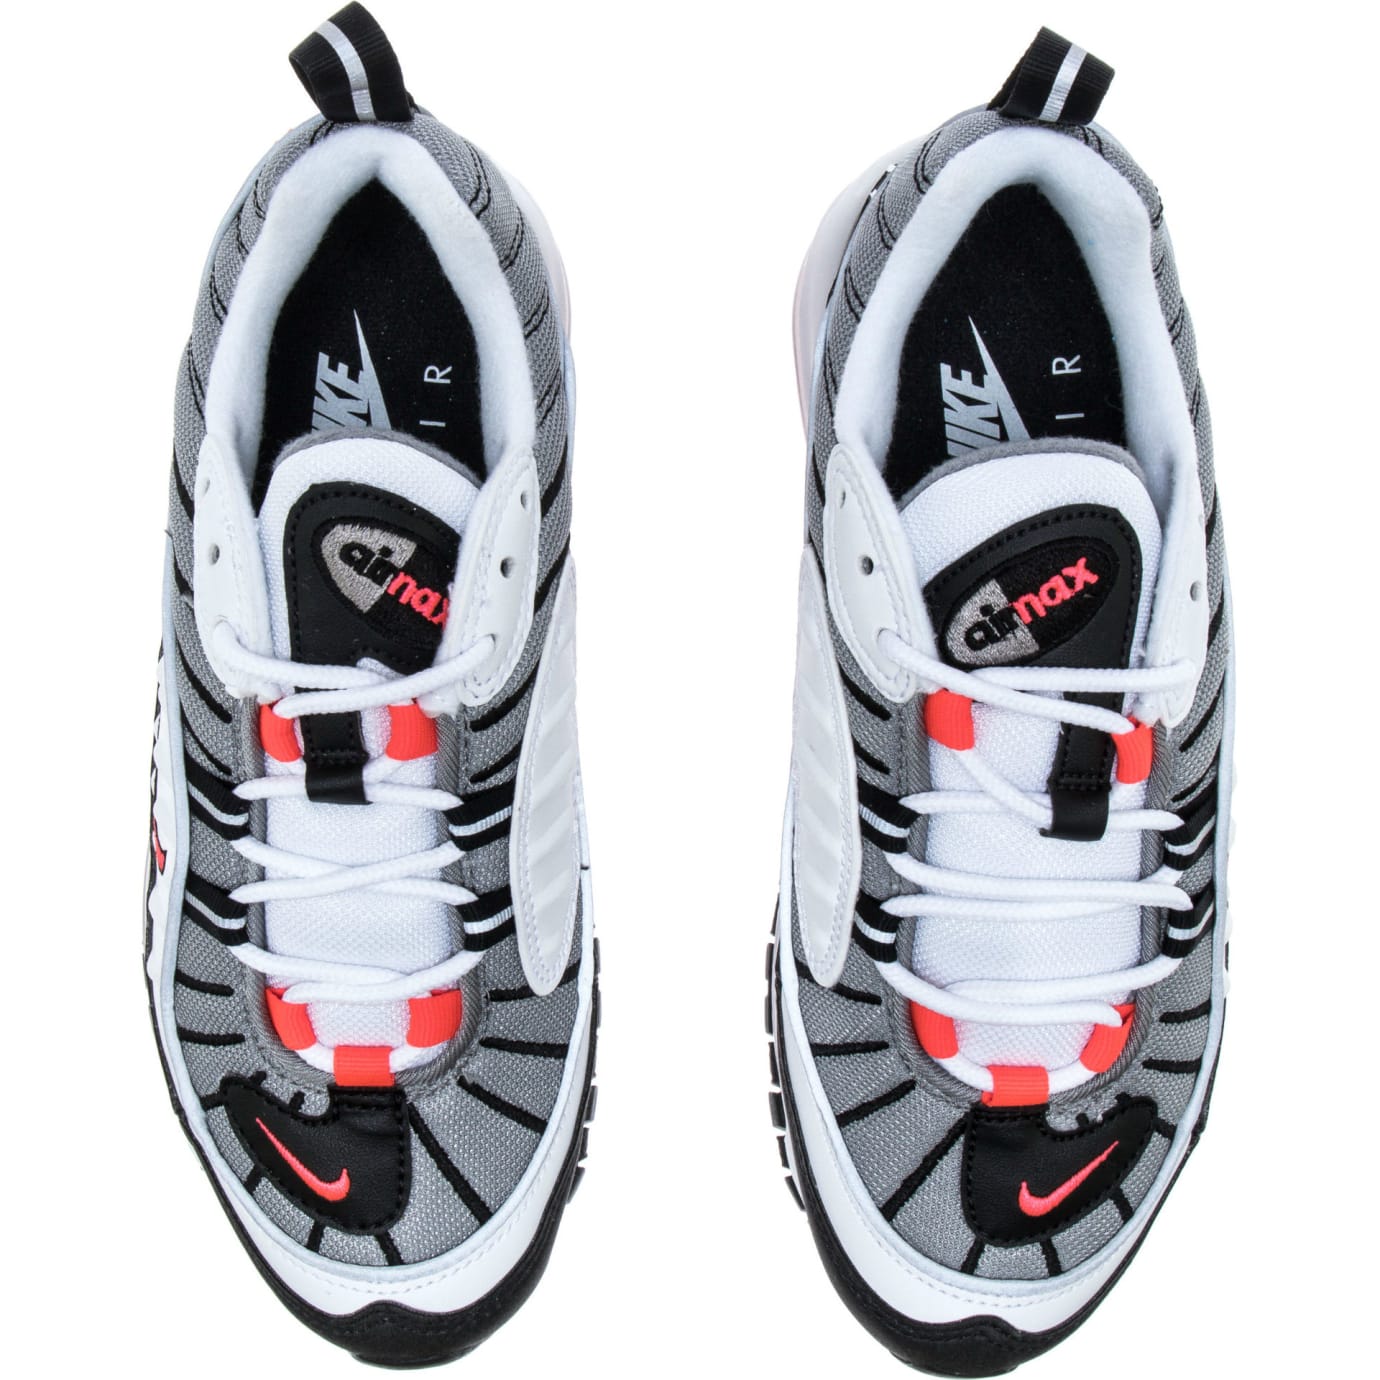 Nike WMNS Air Max 98 Solar Red Release Date AH6799-104 | Sole ... الهزاع